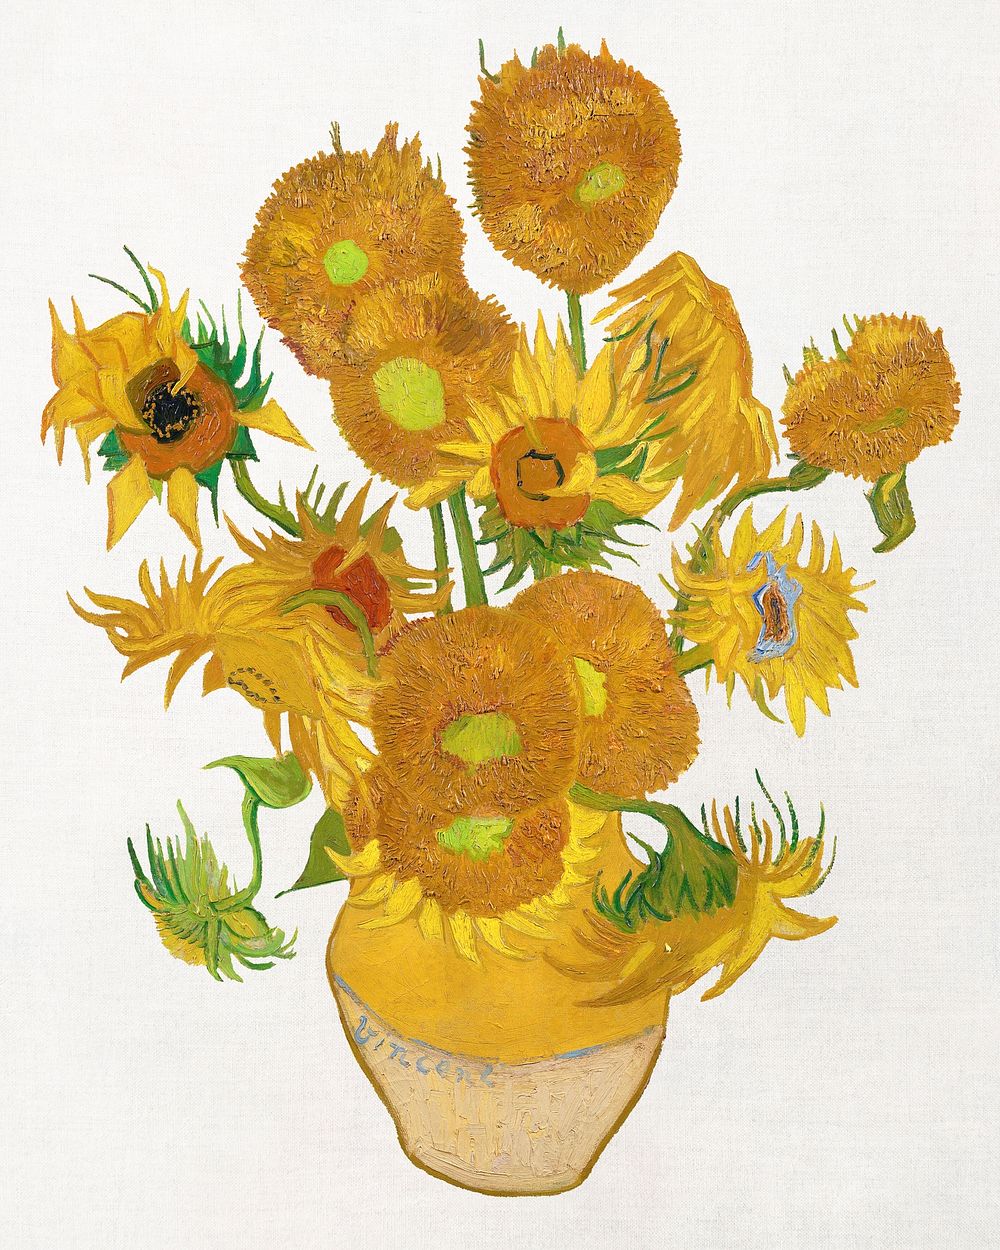 Van Gogh&rsquo;s Sunflowers clipart, vintage oil painting illustration psd, digitally enhanced from famous artwork 